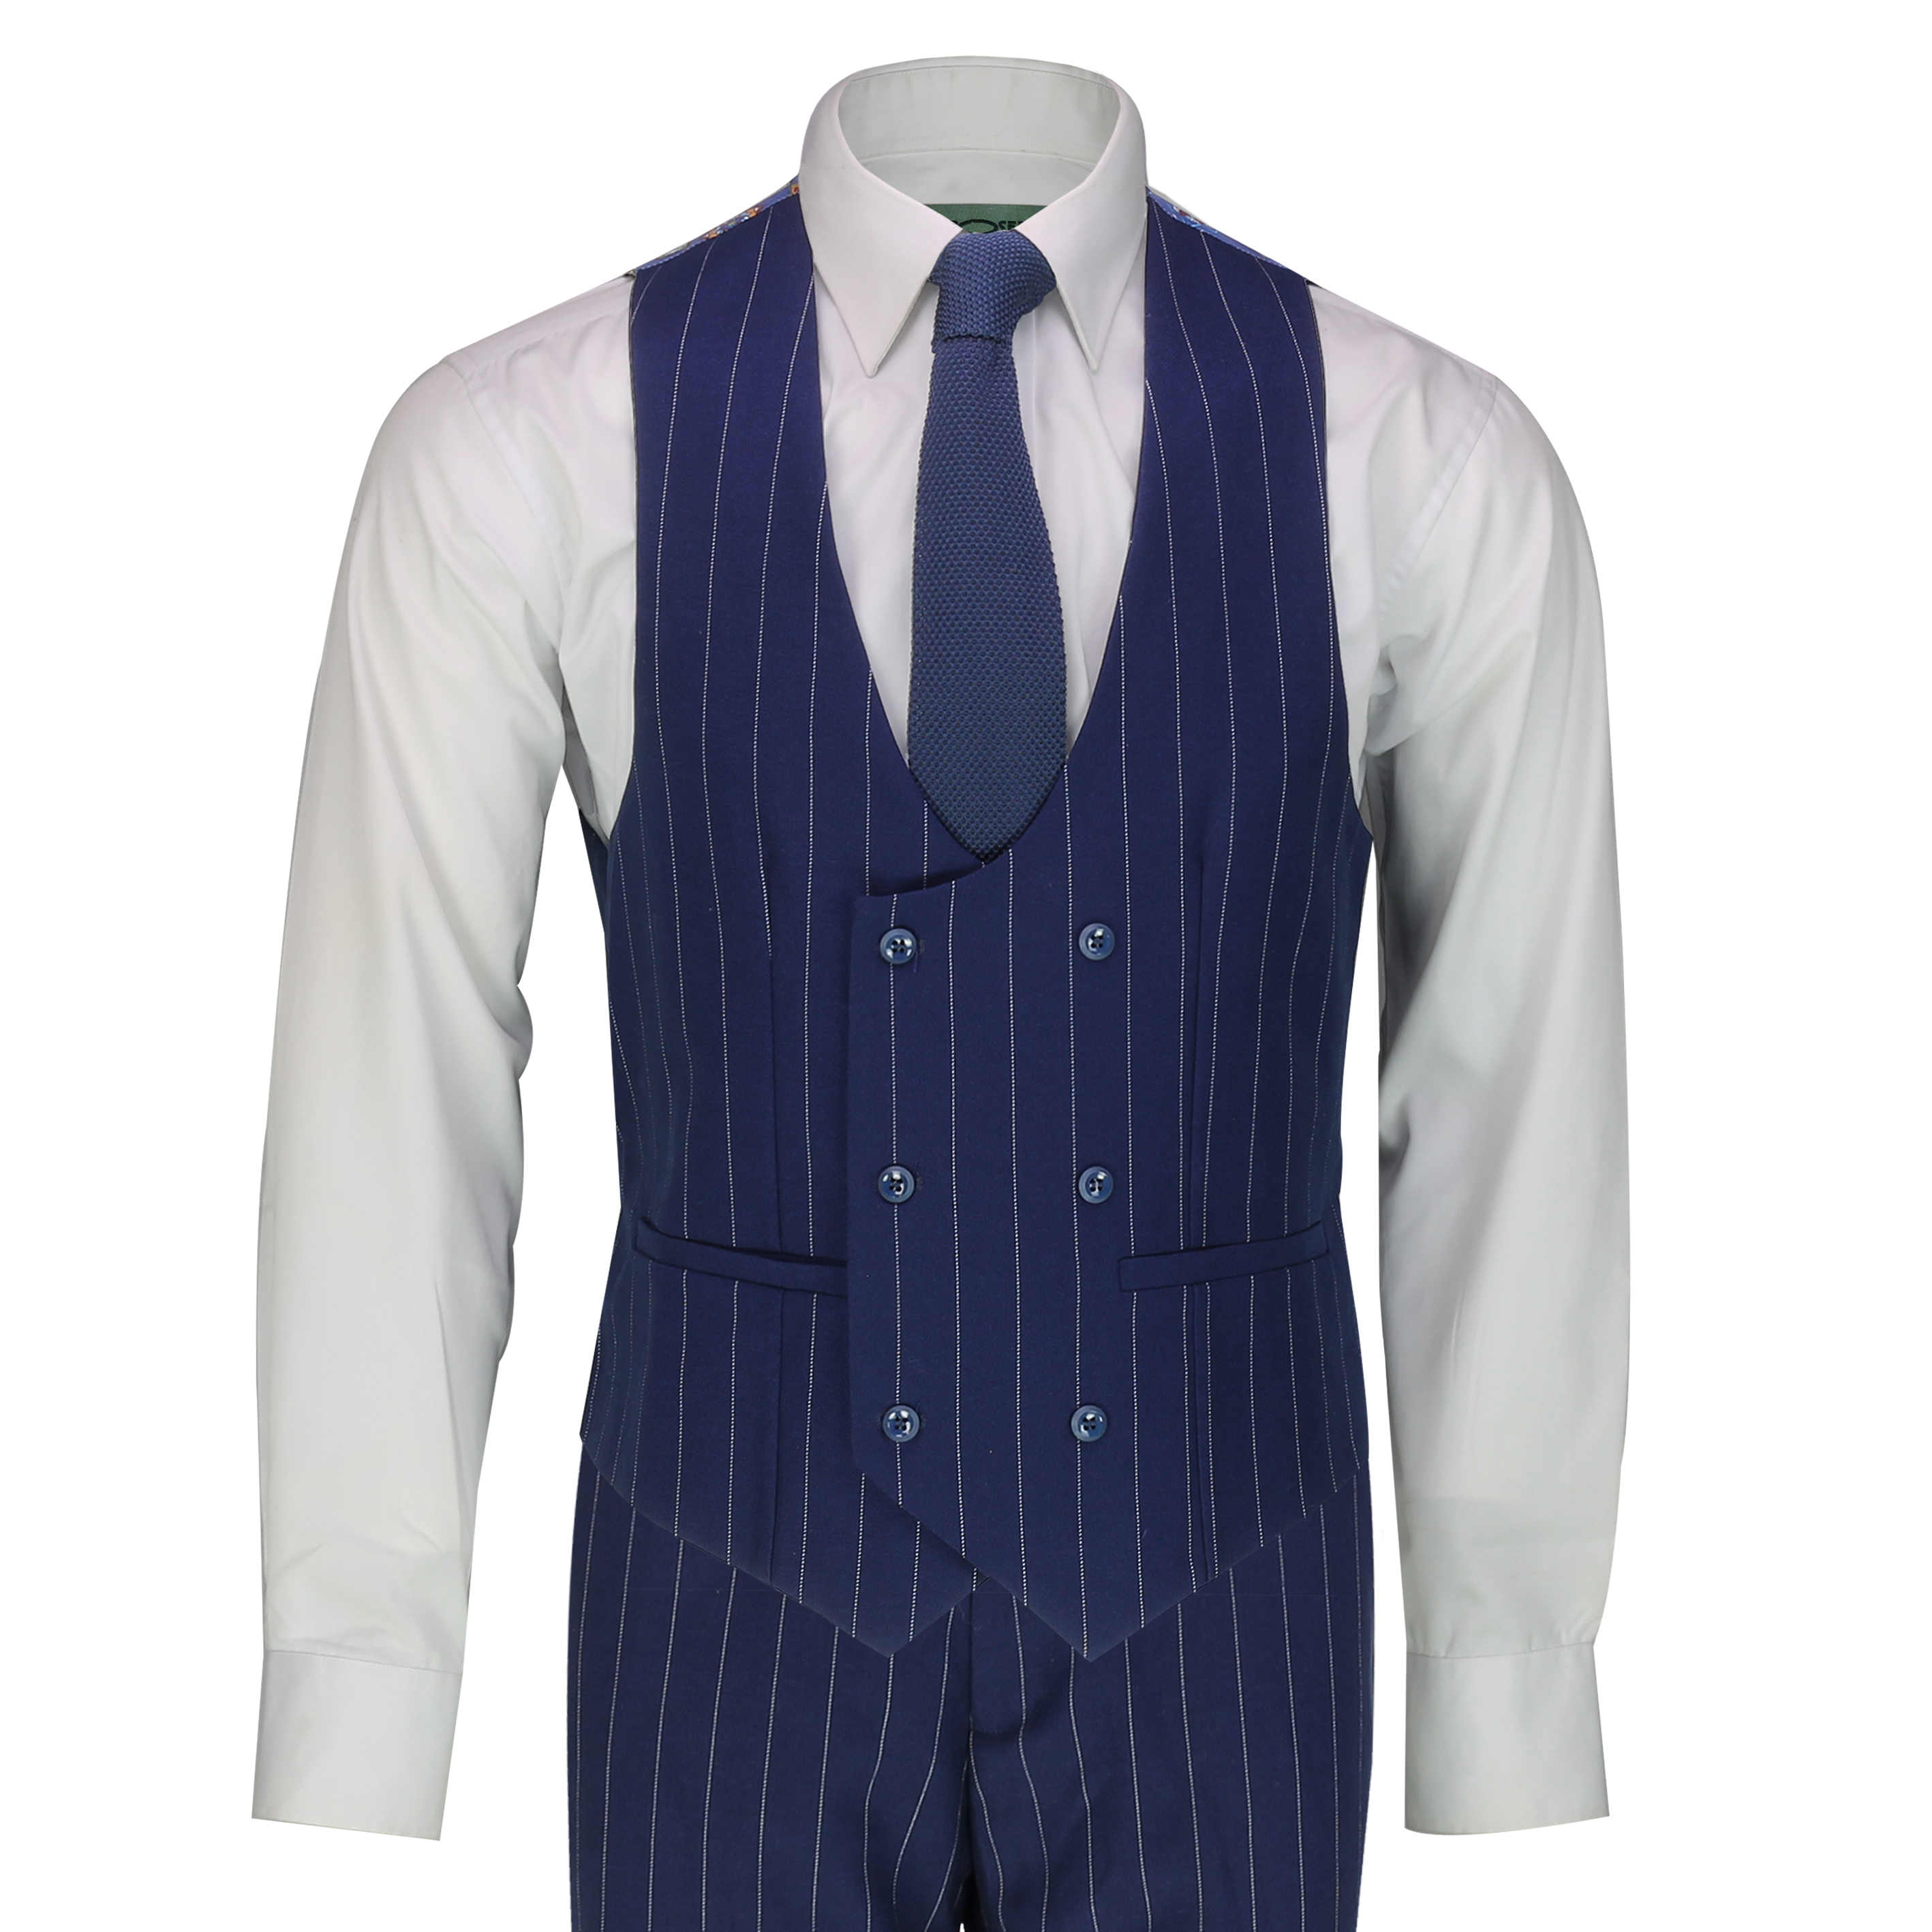 Mens 3 Piece Double Breasted Suit 1920 Retro Navy Pinstripe Classic  Tailored Fit | eBay